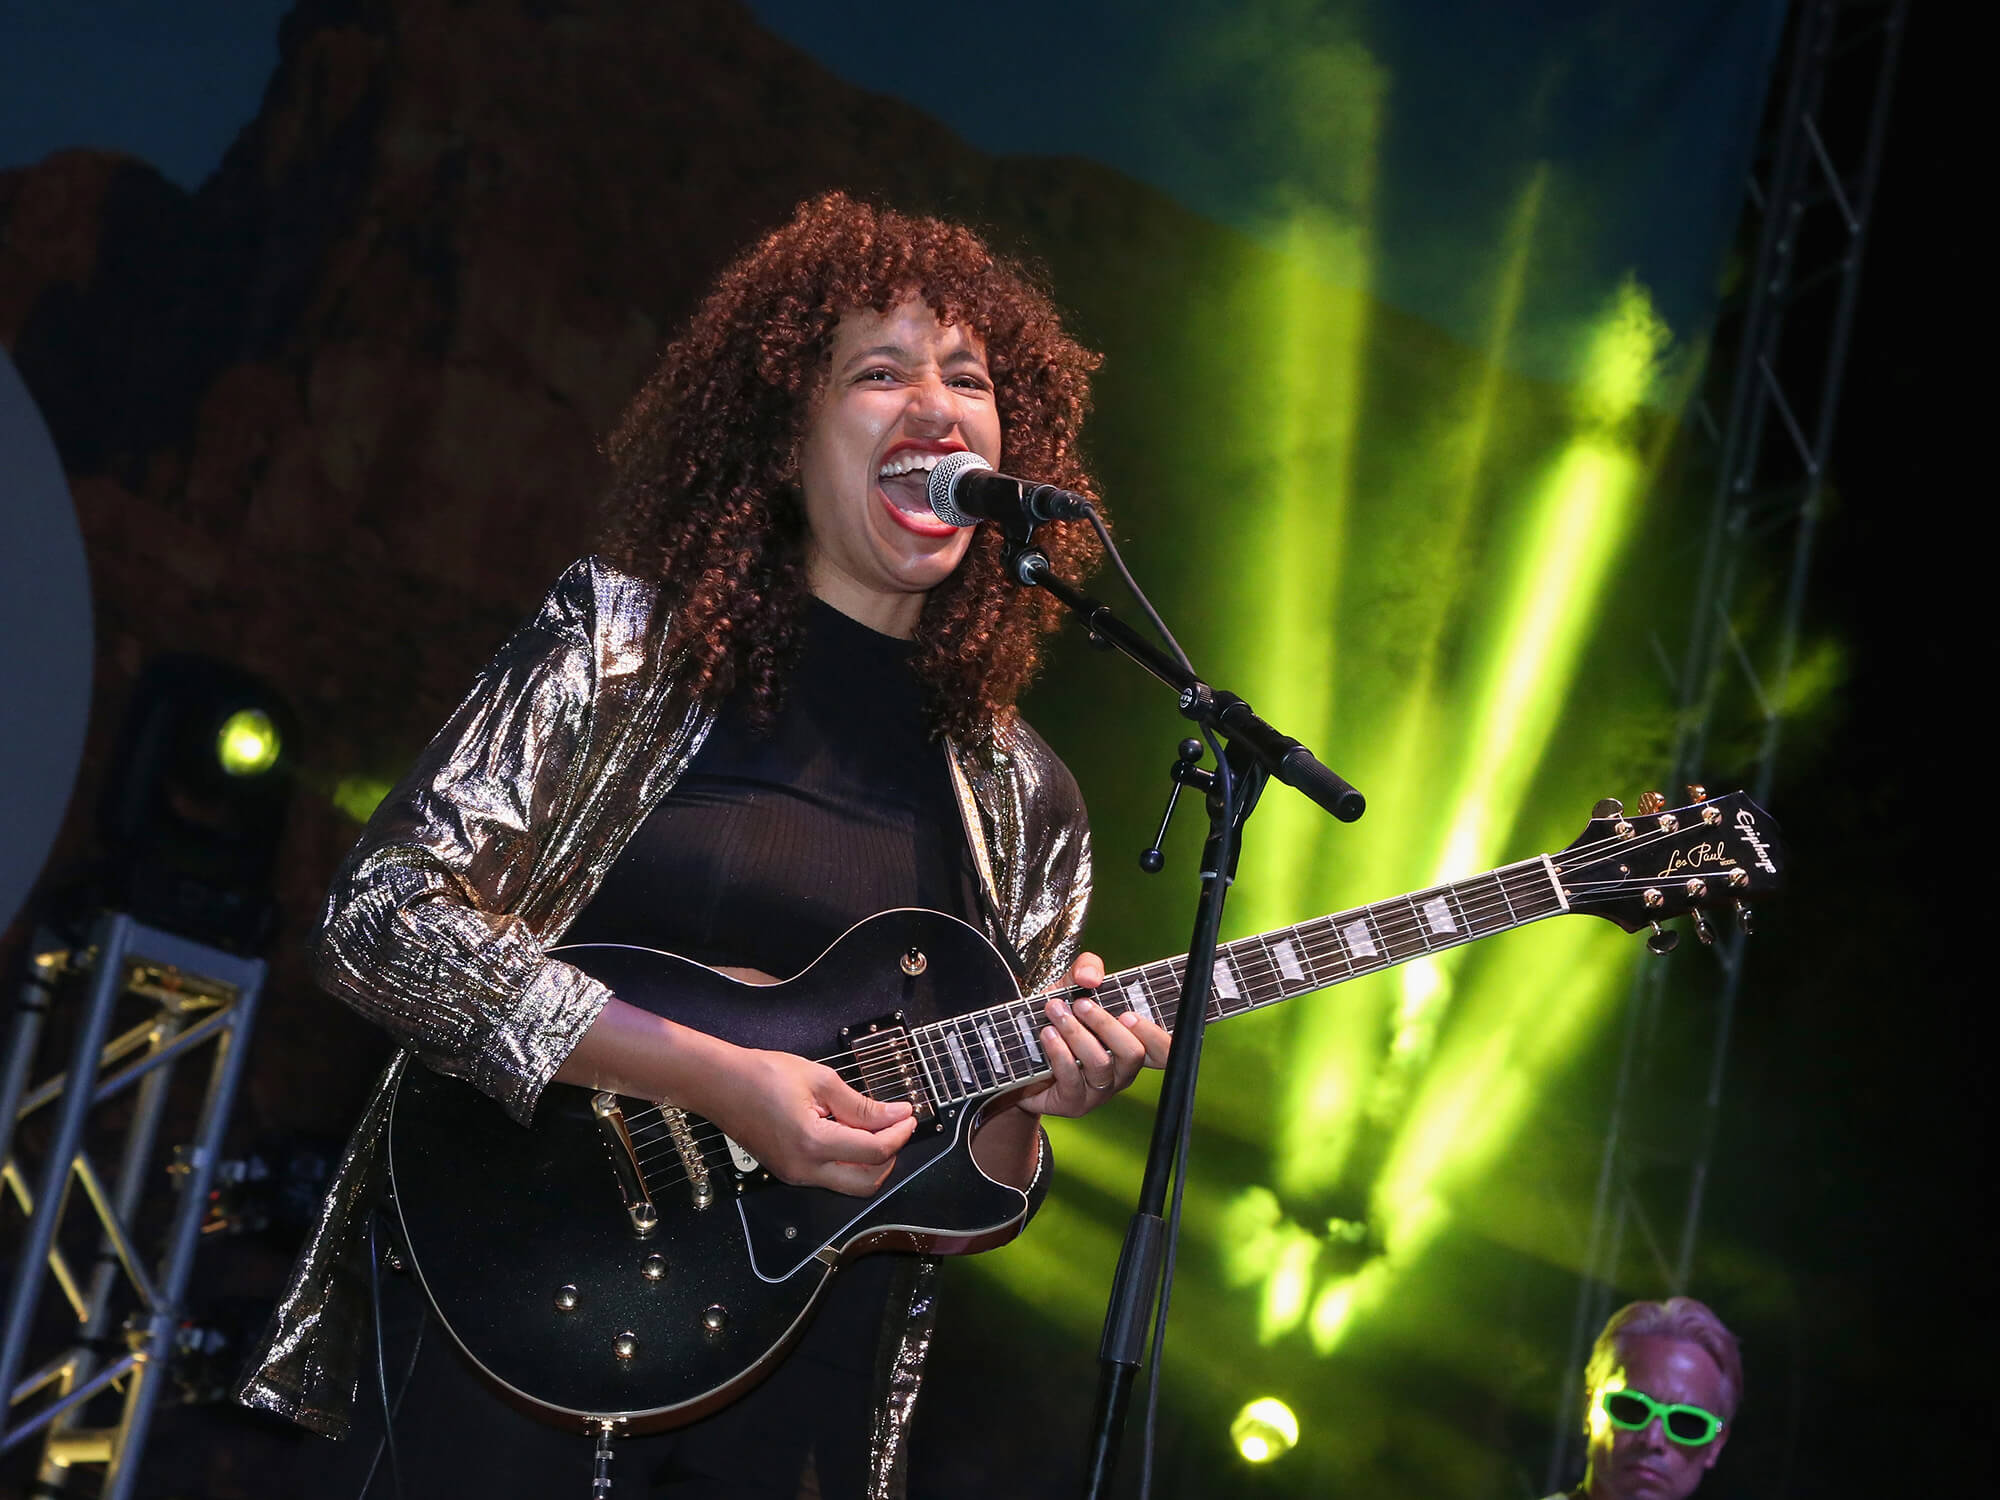 Jackie Venson performs in concert during the first show of the 30th anniversary of Austin City Limits Radio's "Blues on the Green" which was personally curated by Gary Clark Jr. at Zilker Park on July 27, 2021 in Austin, Texas.